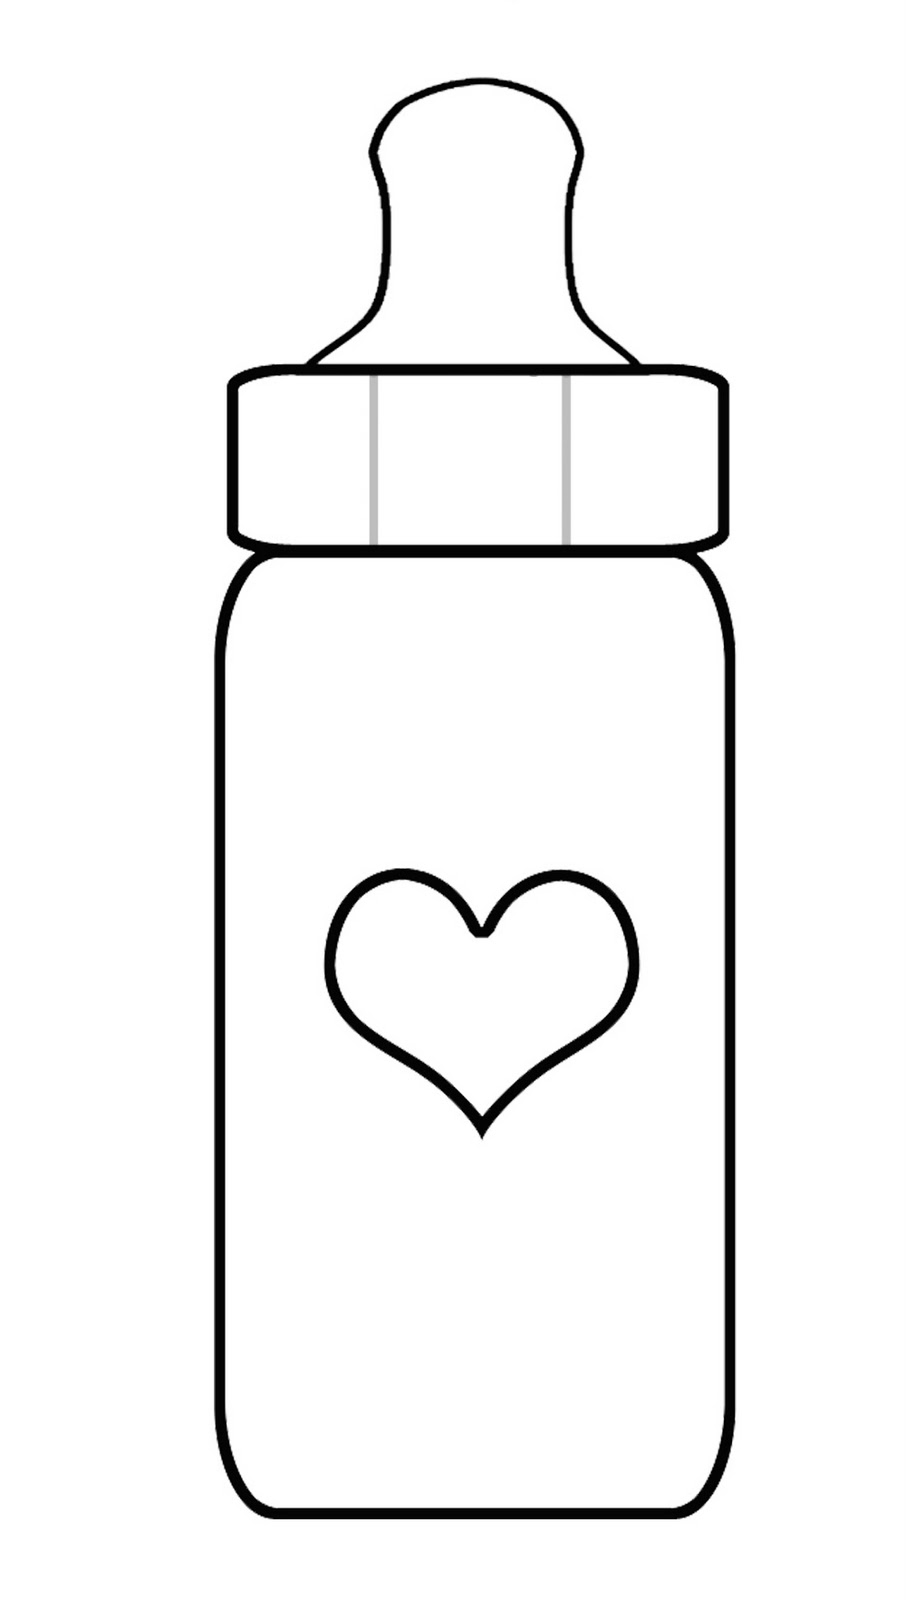 Cartoon Bottle Coloring Page for Adult